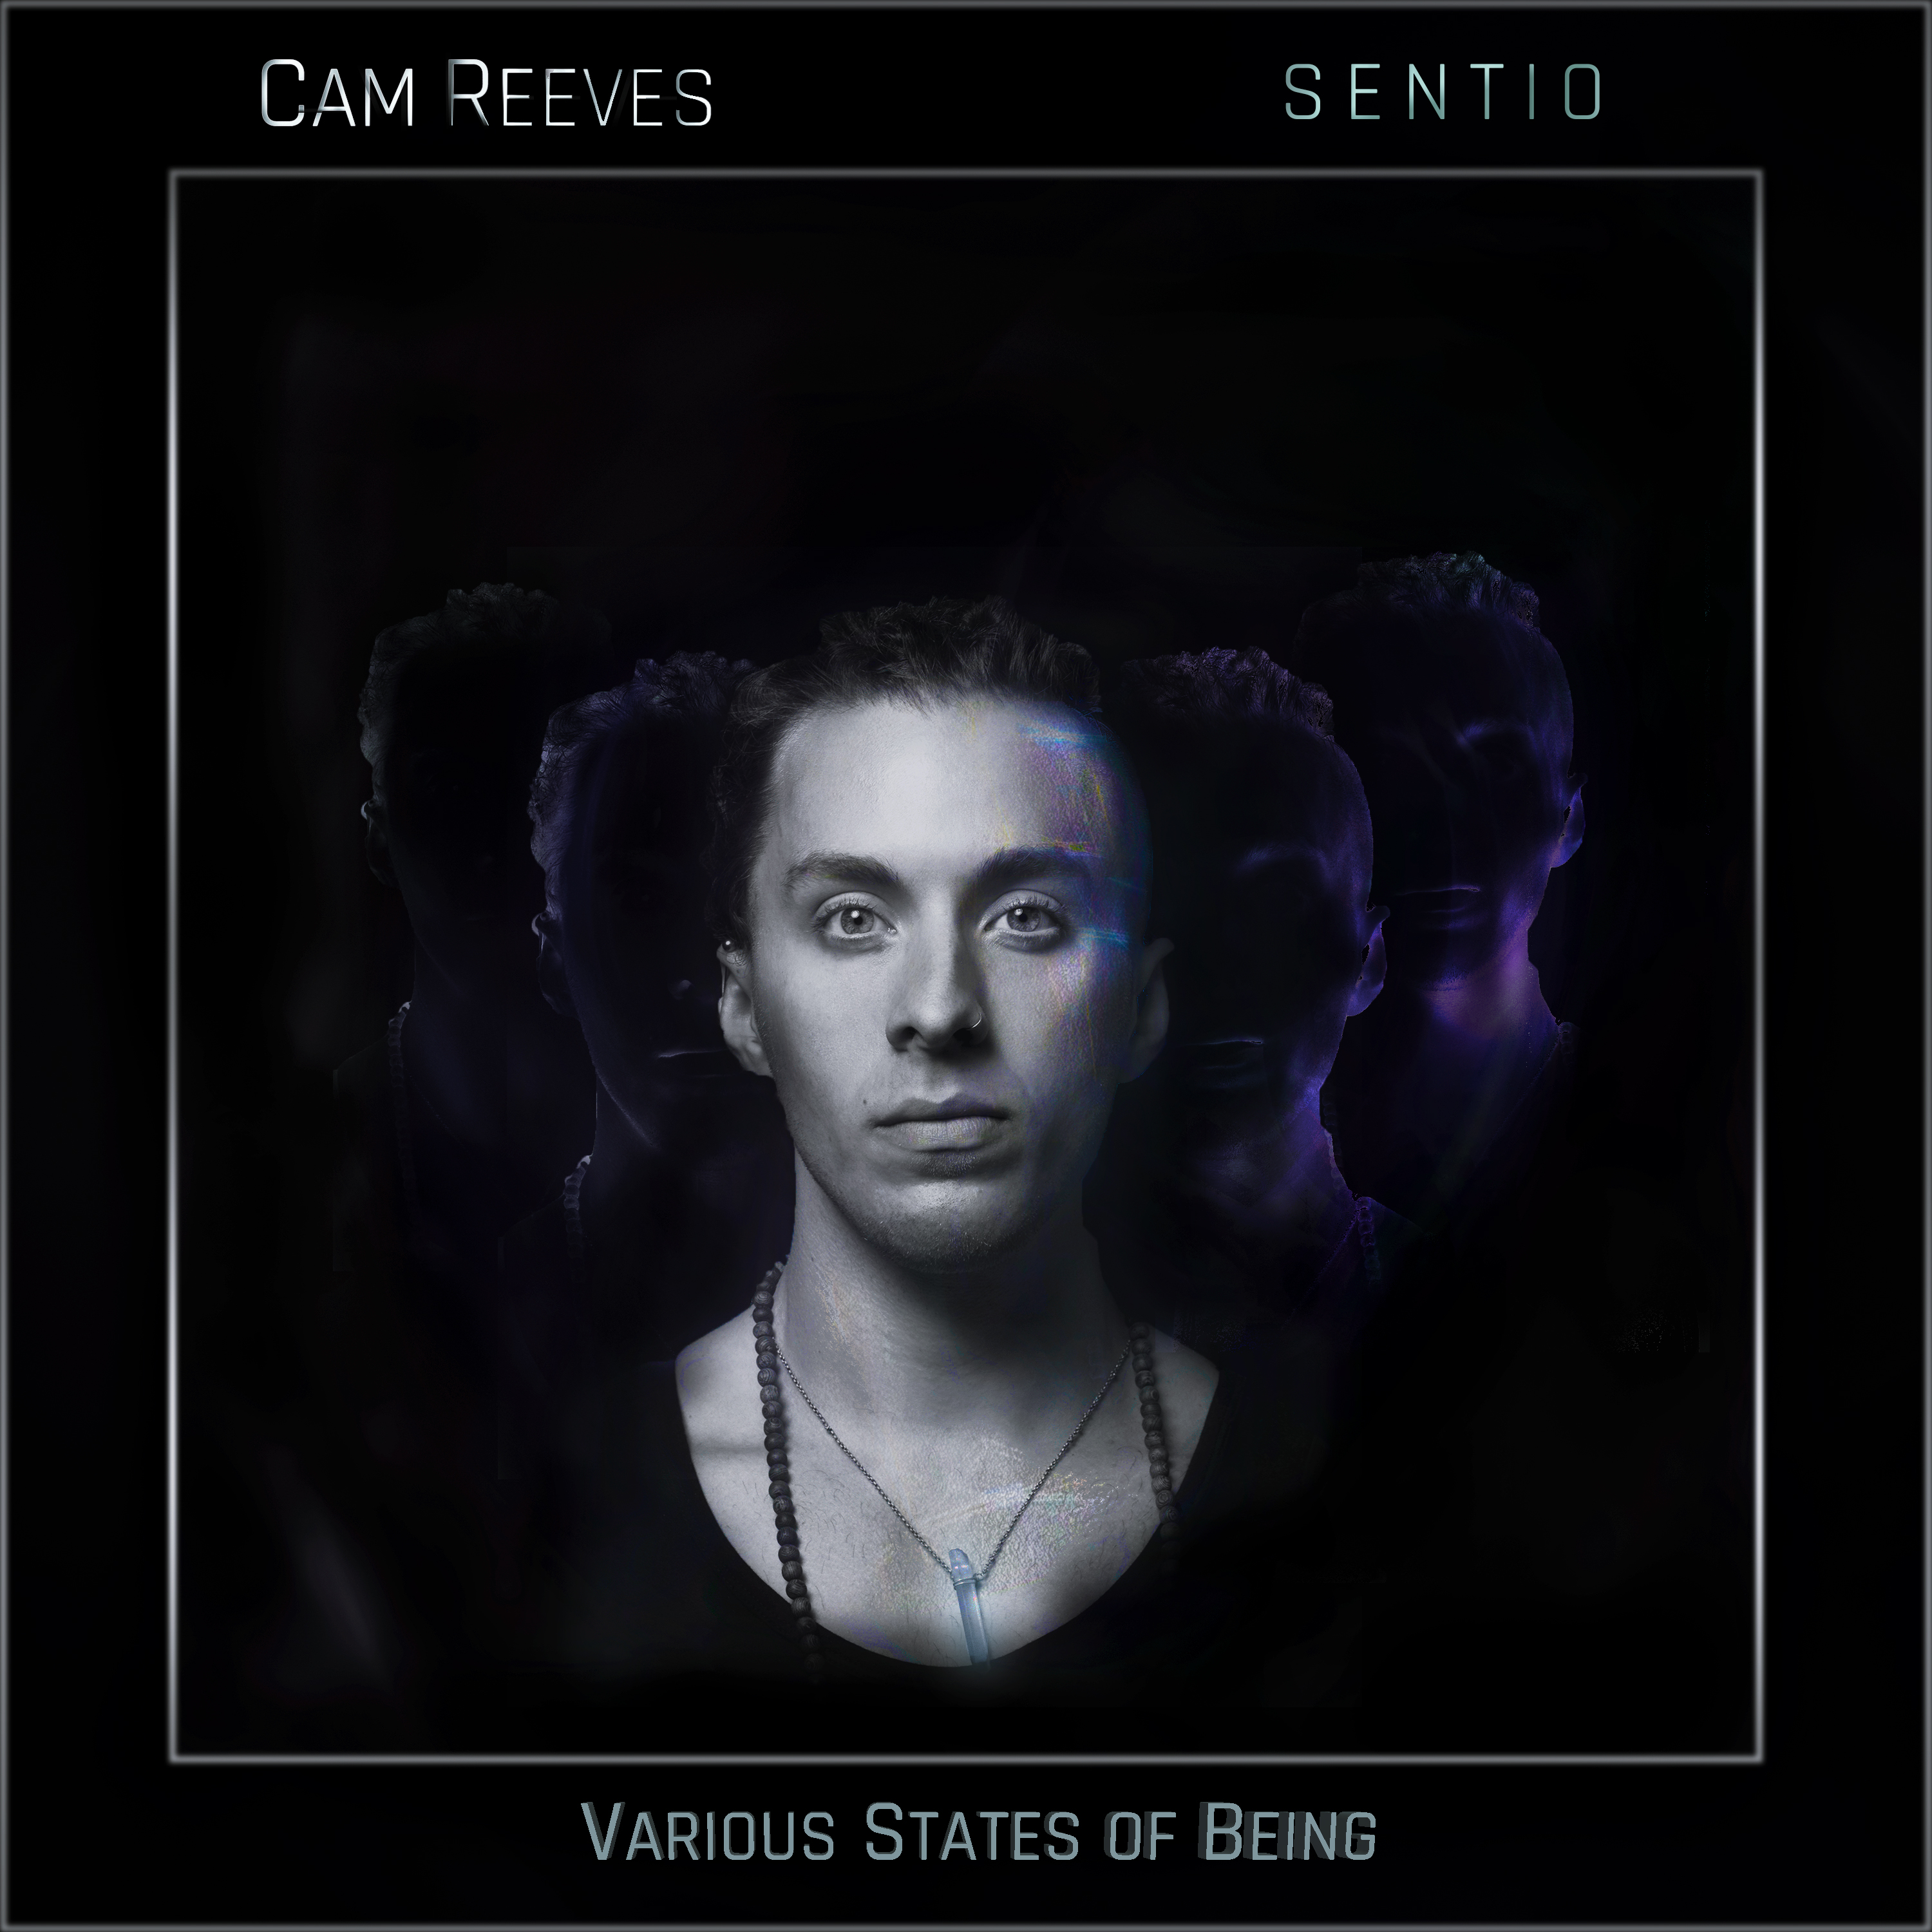 Cam Reeves - Various States of Being: Sentio